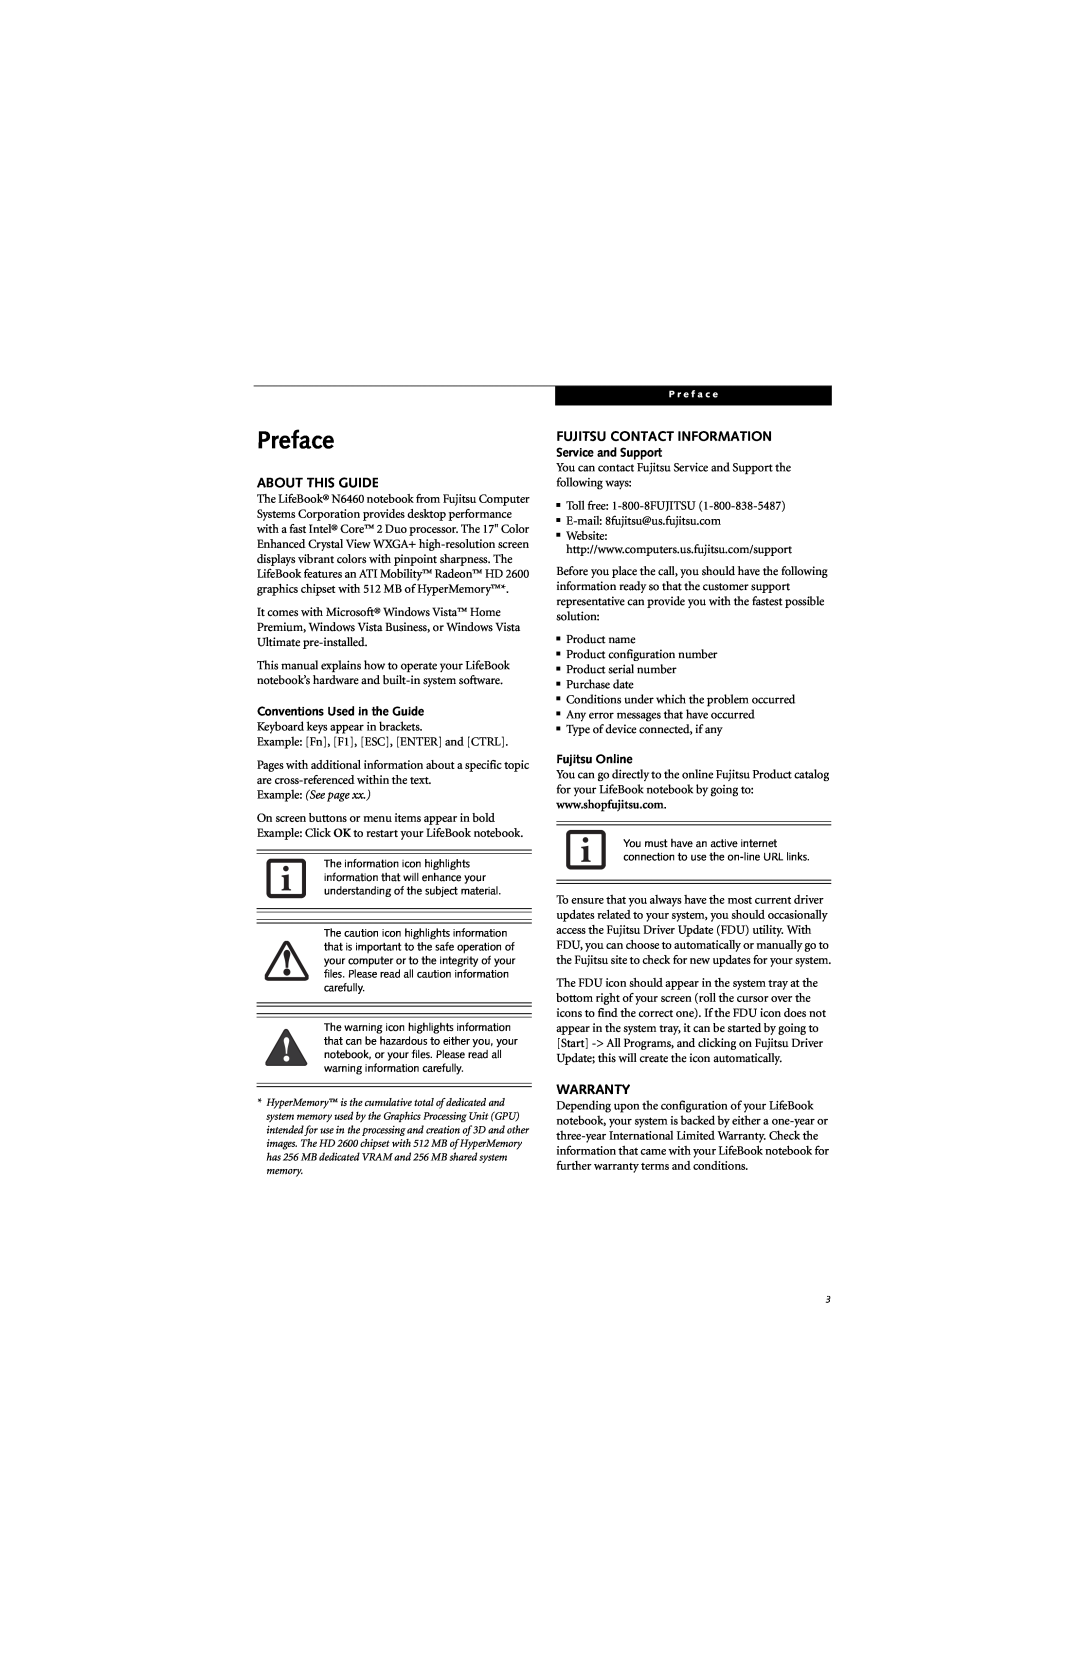 Fujitsu N6460 manual Preface, About This Guide, Fujitsu Contact Information, Warranty, Conventions Used in the Guide 